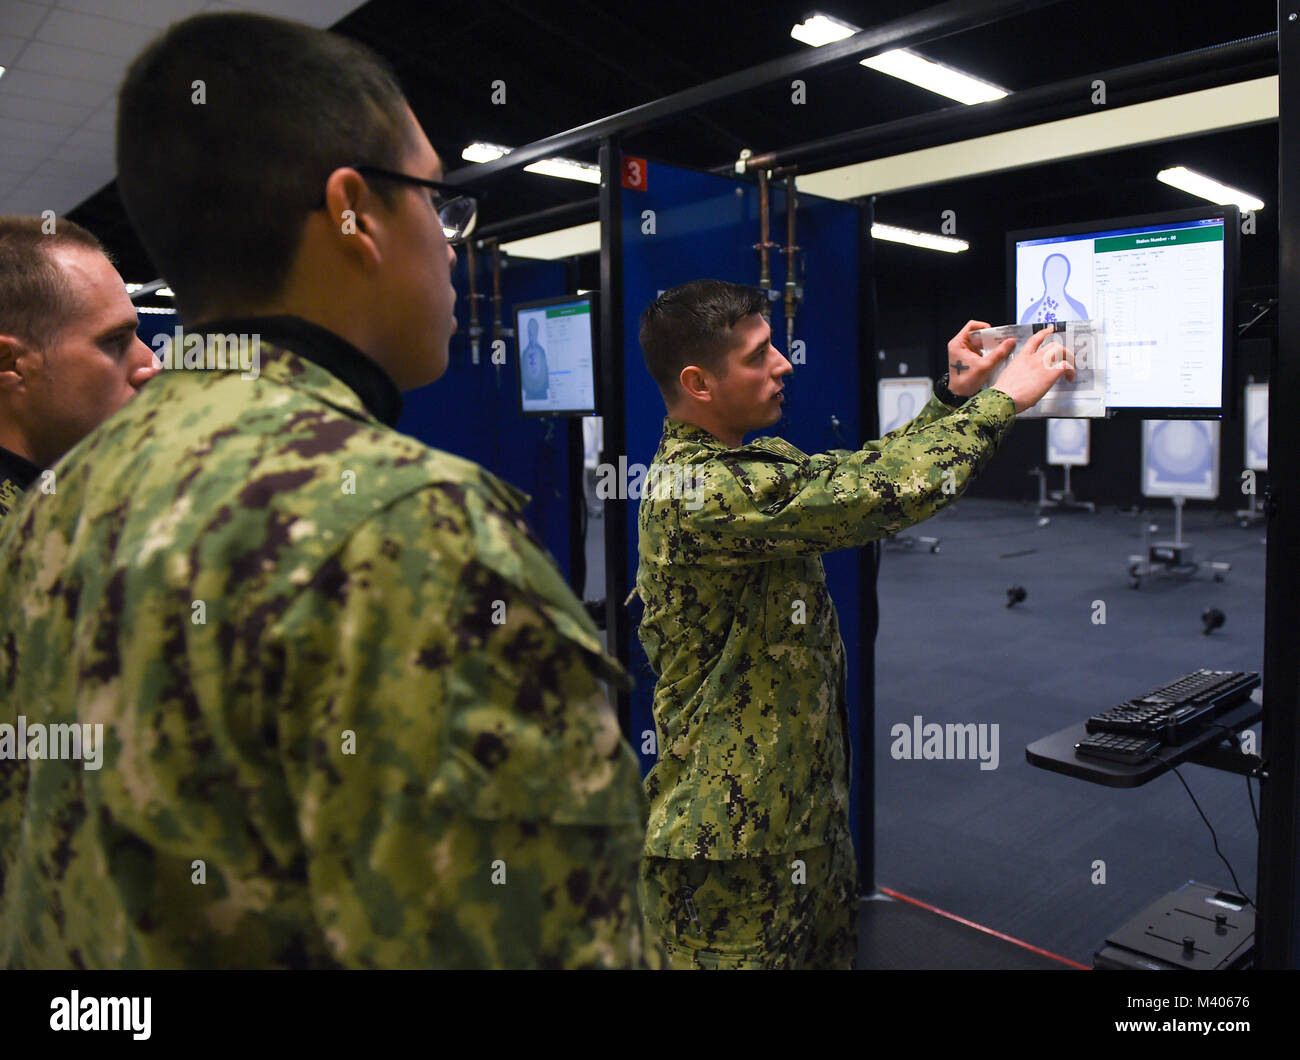 180206-N-FA012-108  GREAT LAKES, Ill (Feb. 5, 2018) Gunner’s Mate 1st Class David Tercero works with recruits after shooting at USS Missouri Simulated Arms Marksmanship Trainer (SAMT). USS Missouri is where recruits first become familiarized with firing a weapon with simulated laser-guided, air-compressed, 9-millimeter handguns and 12-gauge shotguns. About 30,000 to 40,000 recruits graduate annually from the Navy's only boot camp. (U.S. Navy photo by Mass Communication Specialist Seaman Perla Landa/Released) Stock Photo